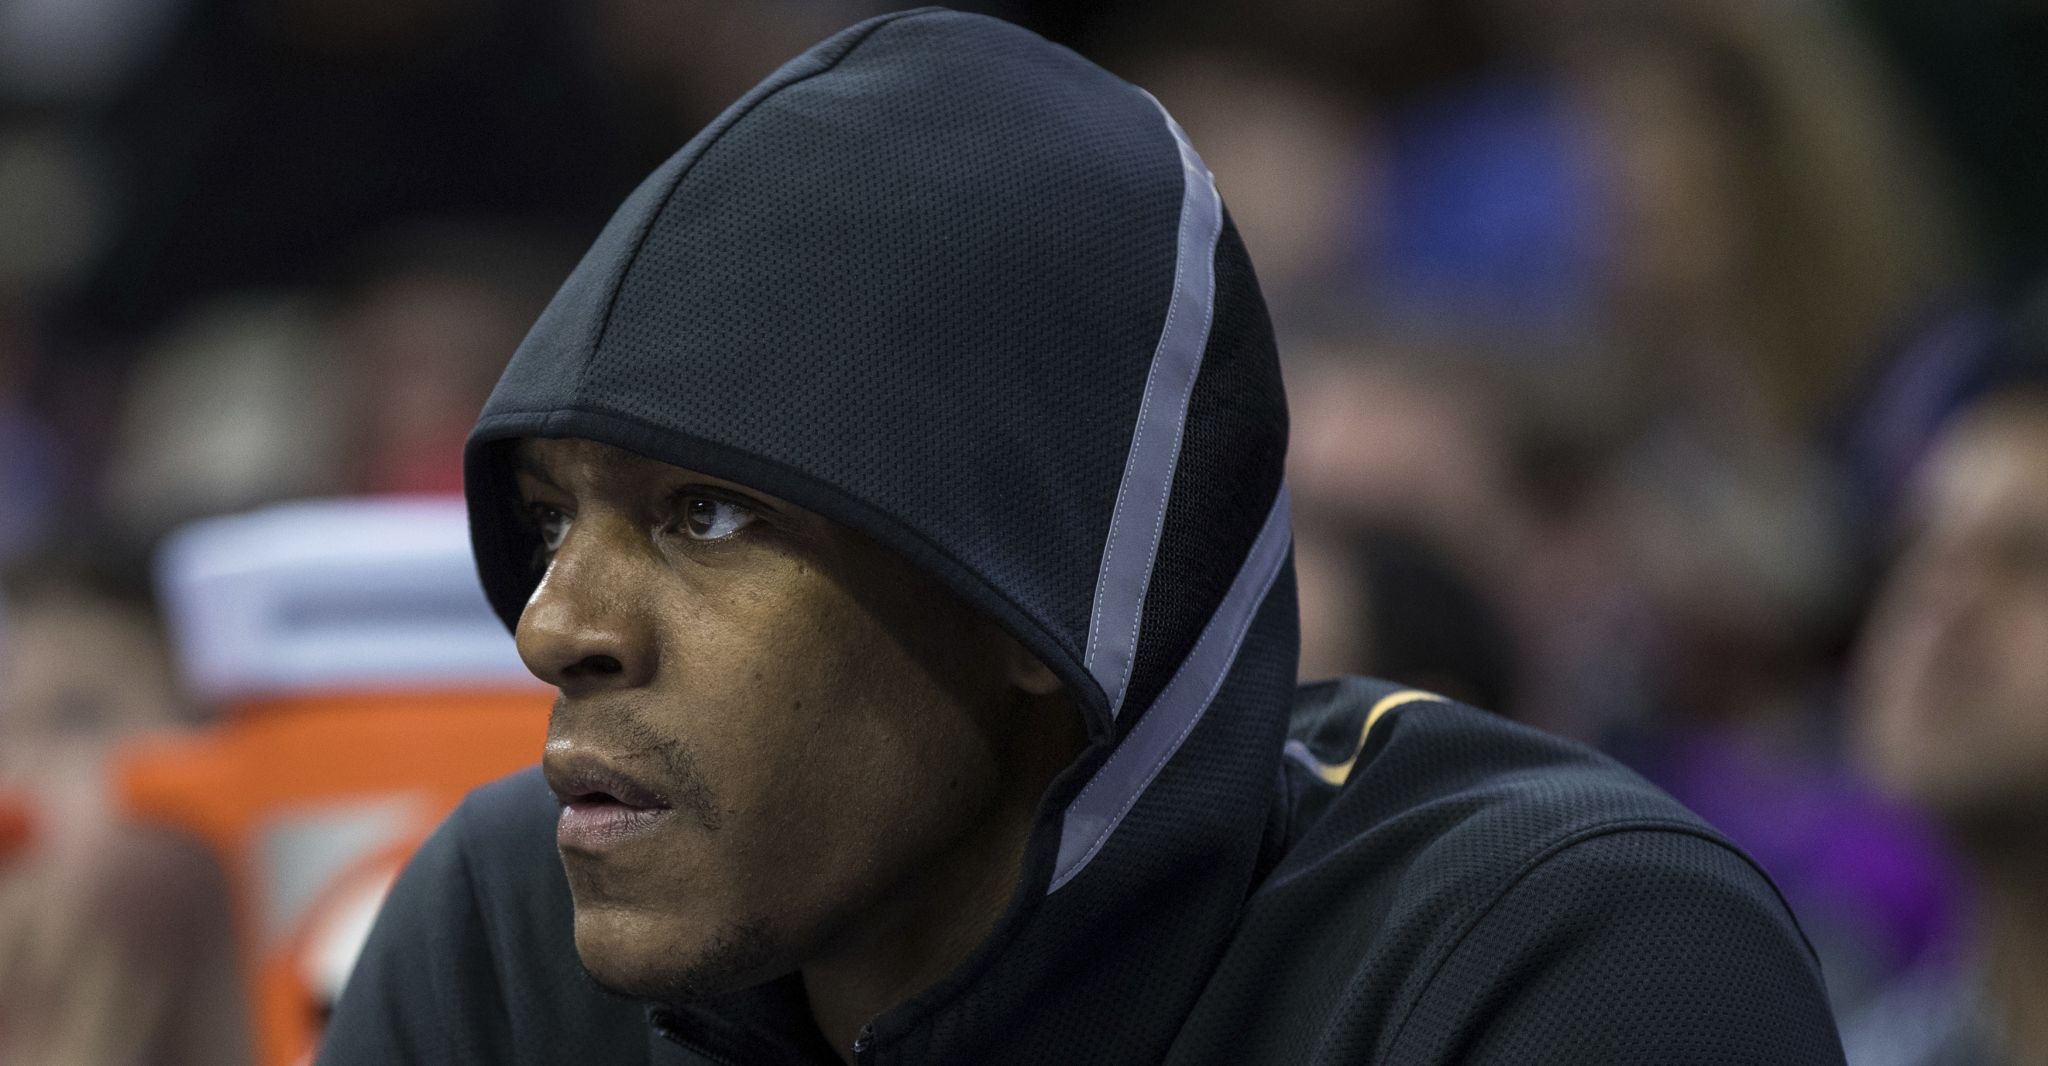 Pelicans' Rajon Rondo to sit out against Rockets